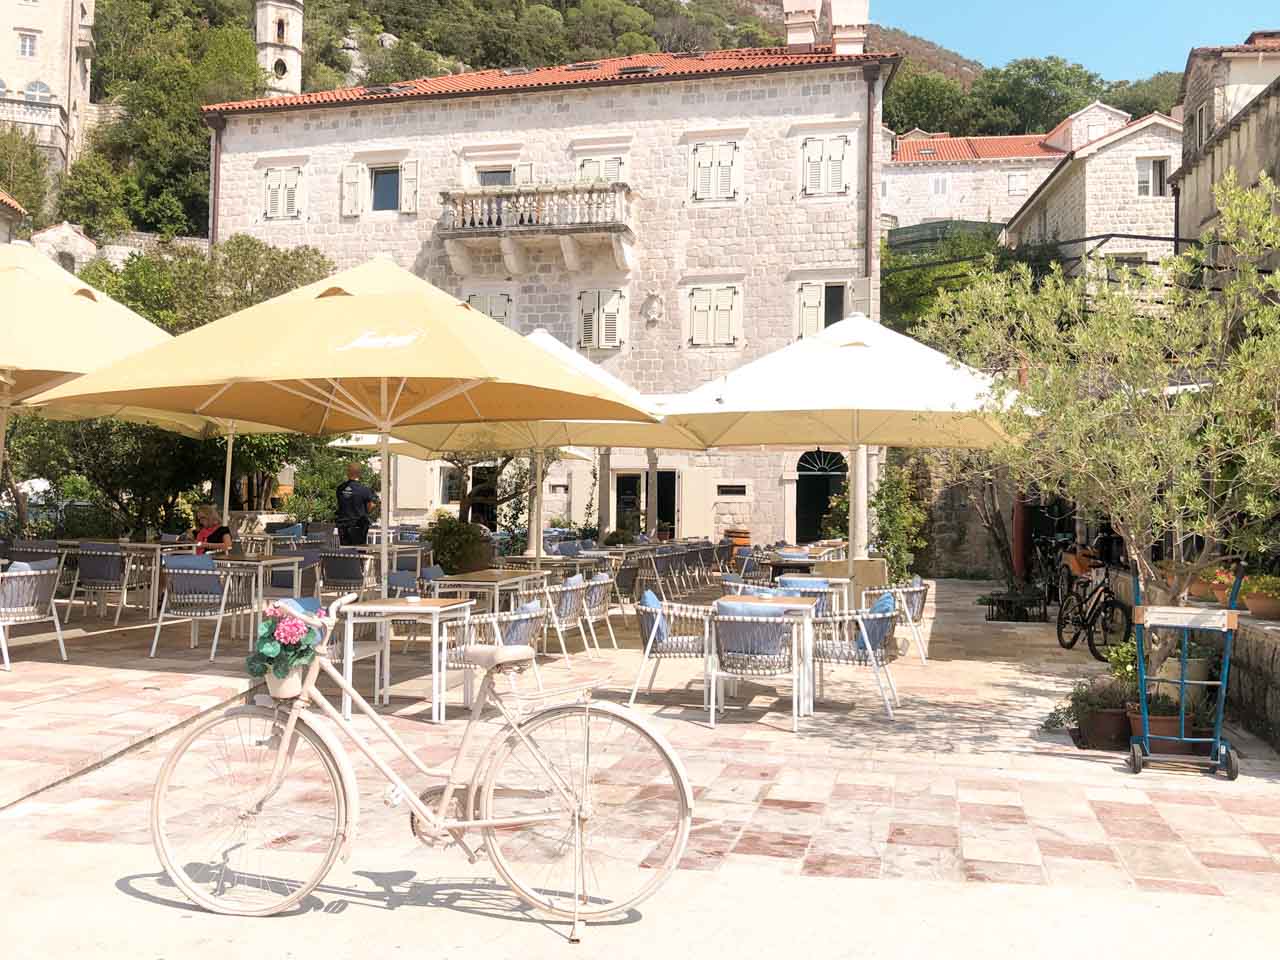 Bike parked on the outdoor terrace of a restaurant in Perast, Montenegro